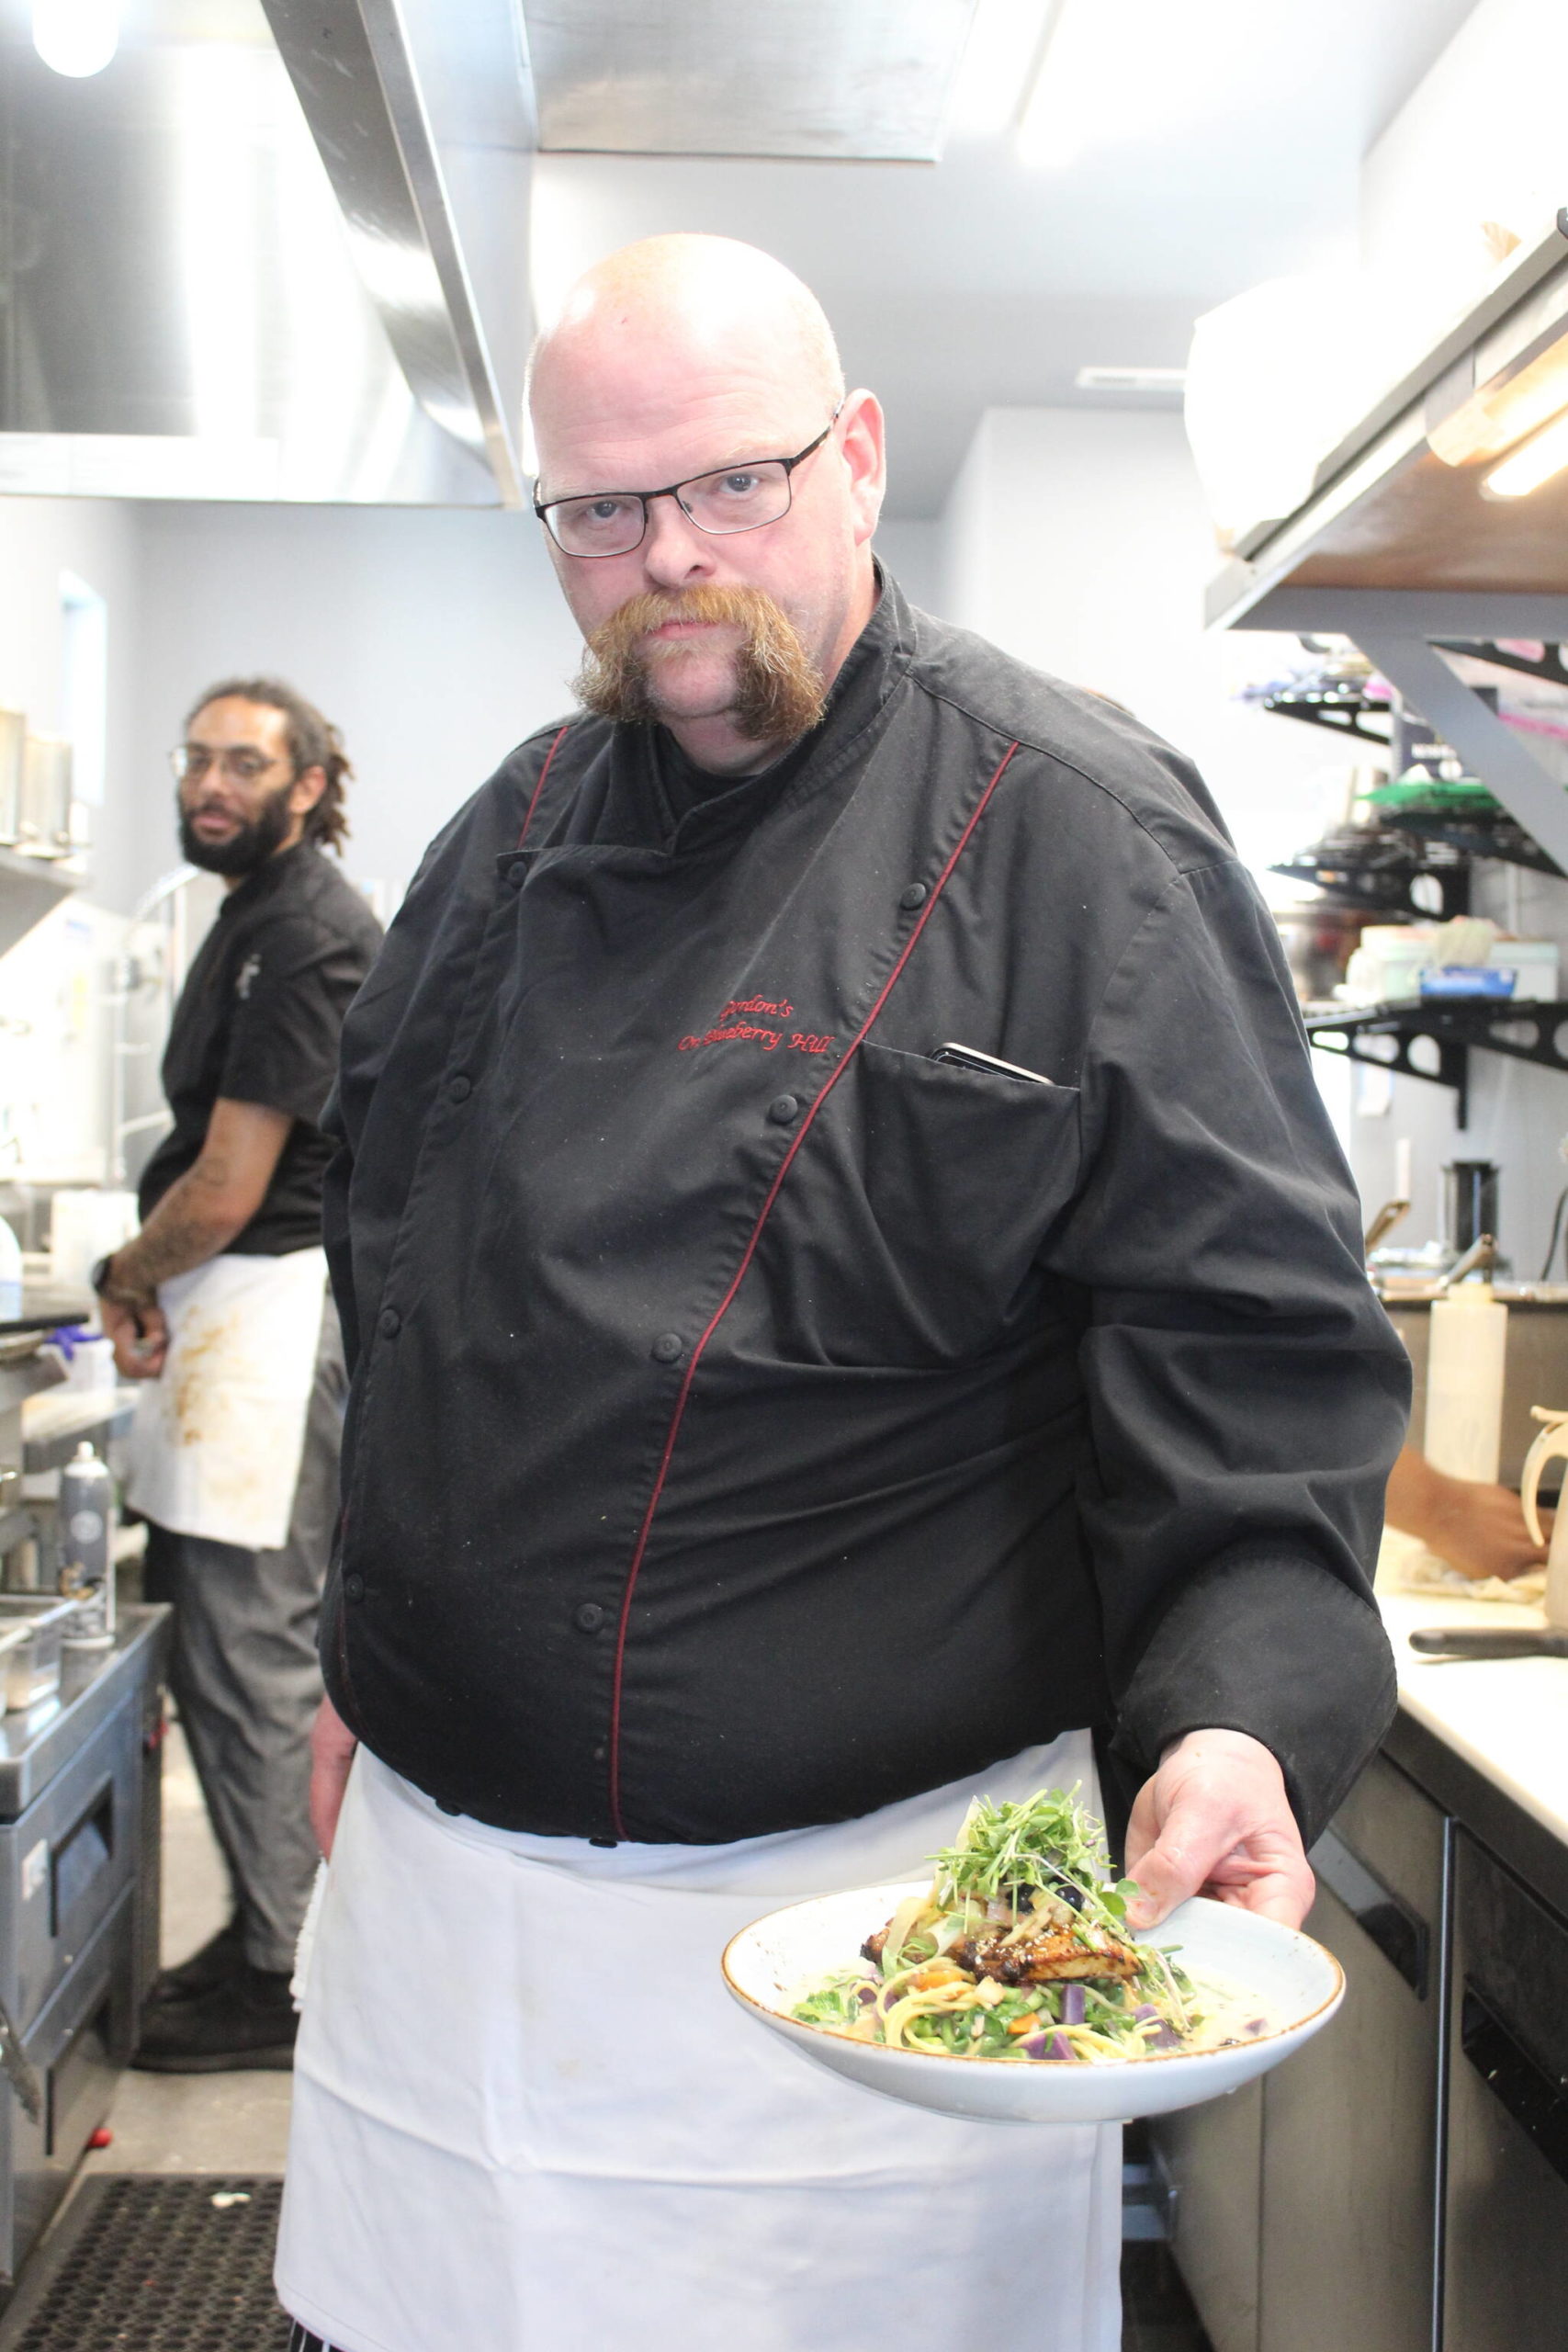 Gordon Stewart shows off one of the unique dishes from the Gordon’s Fusion menu. (Photo by Karina Andrew/Whidbey News-Times)